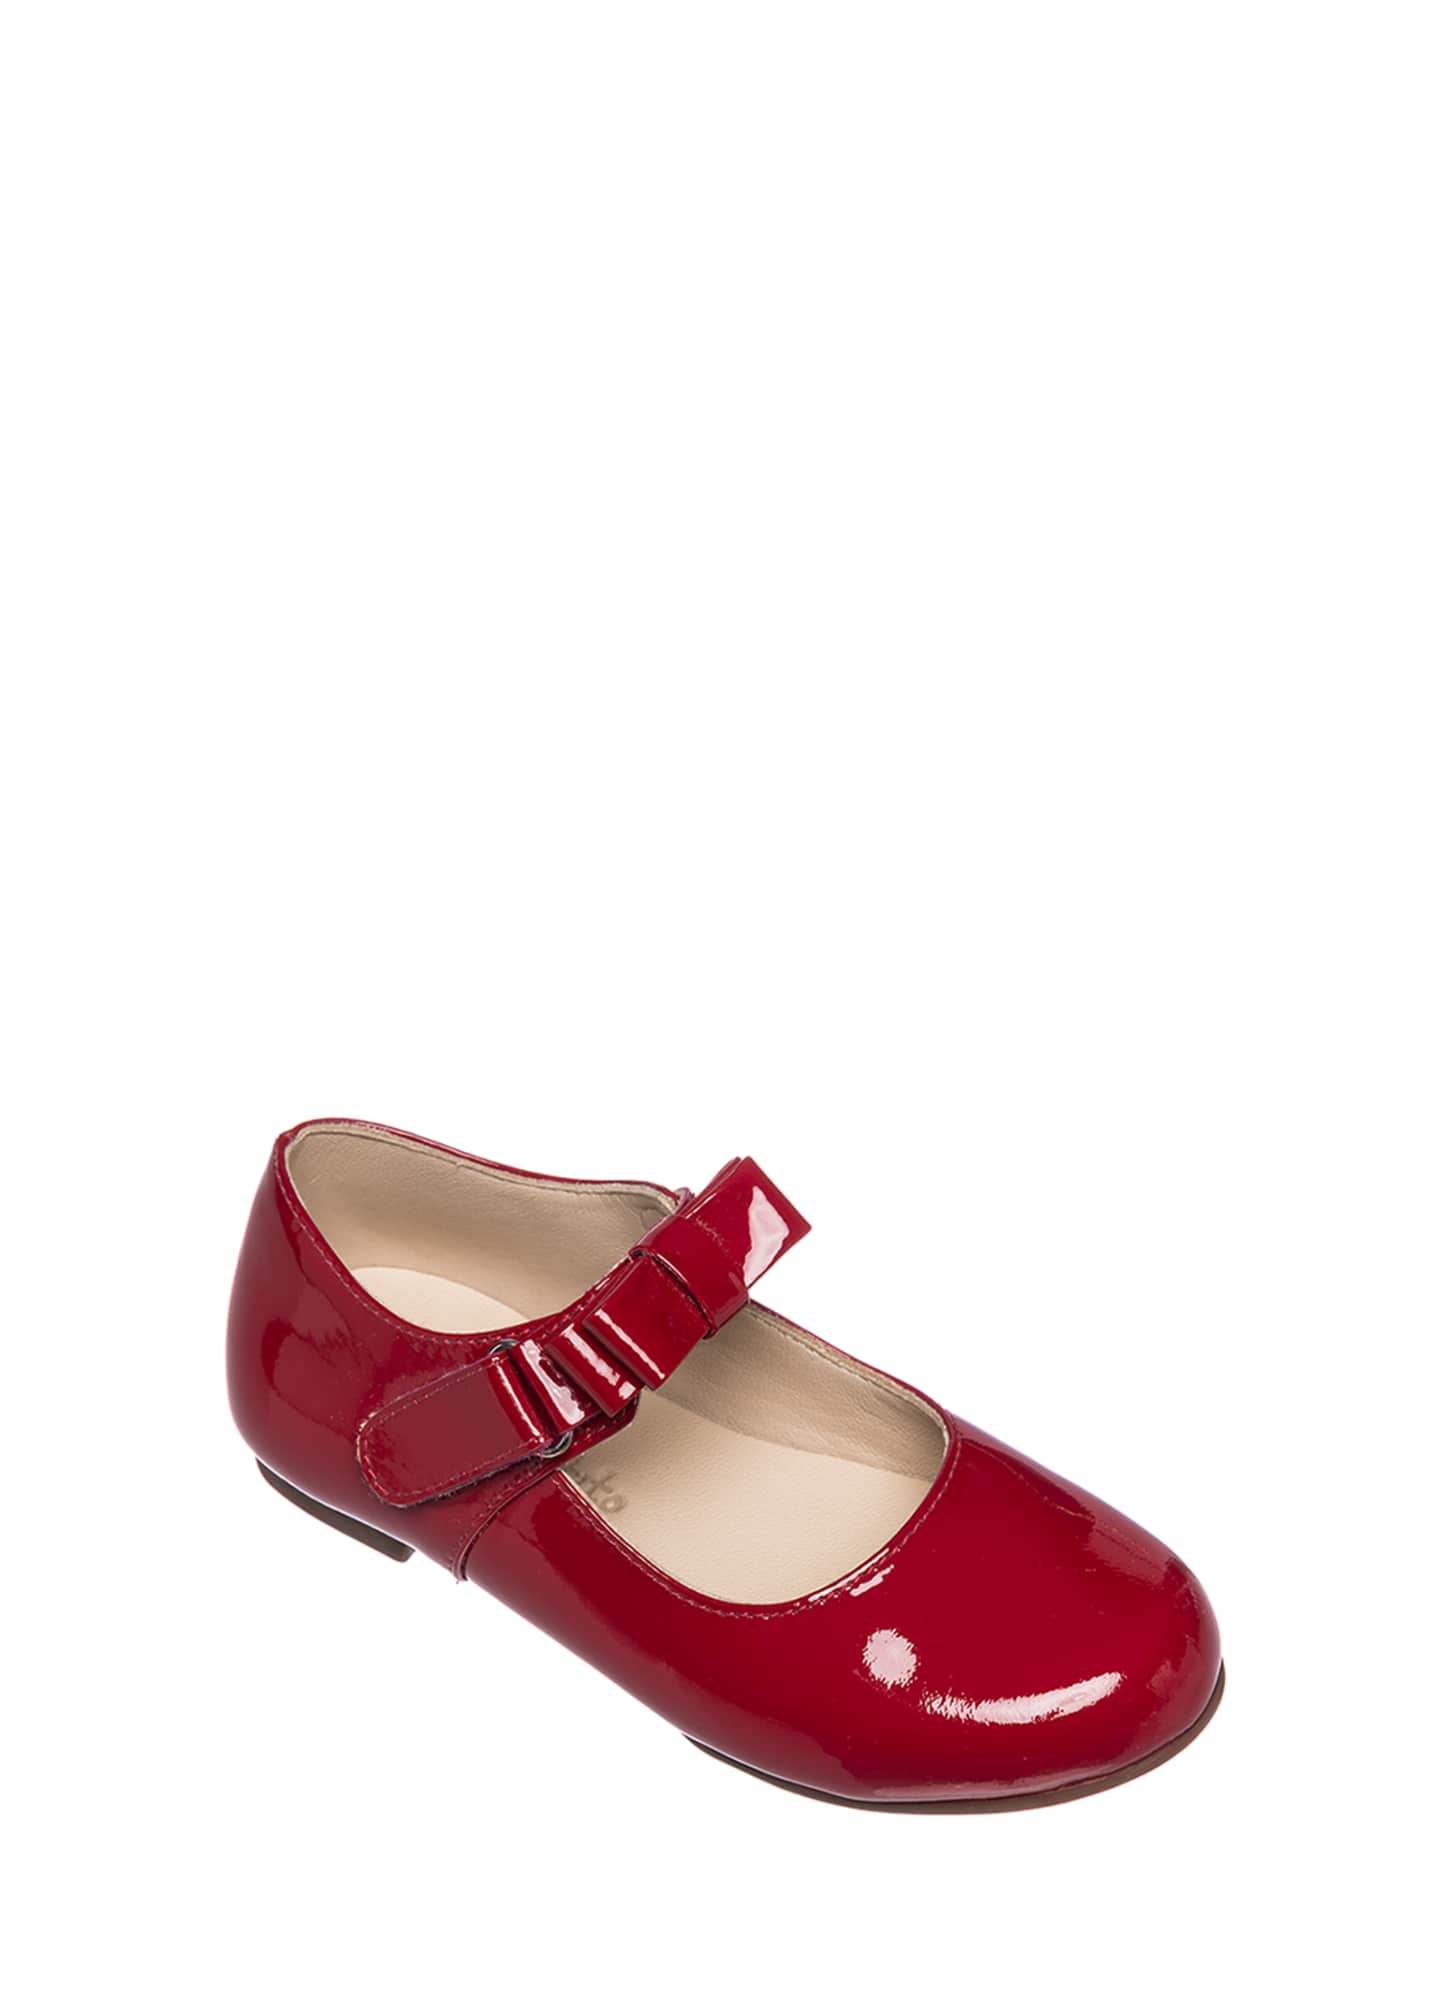 kids leather mary janes